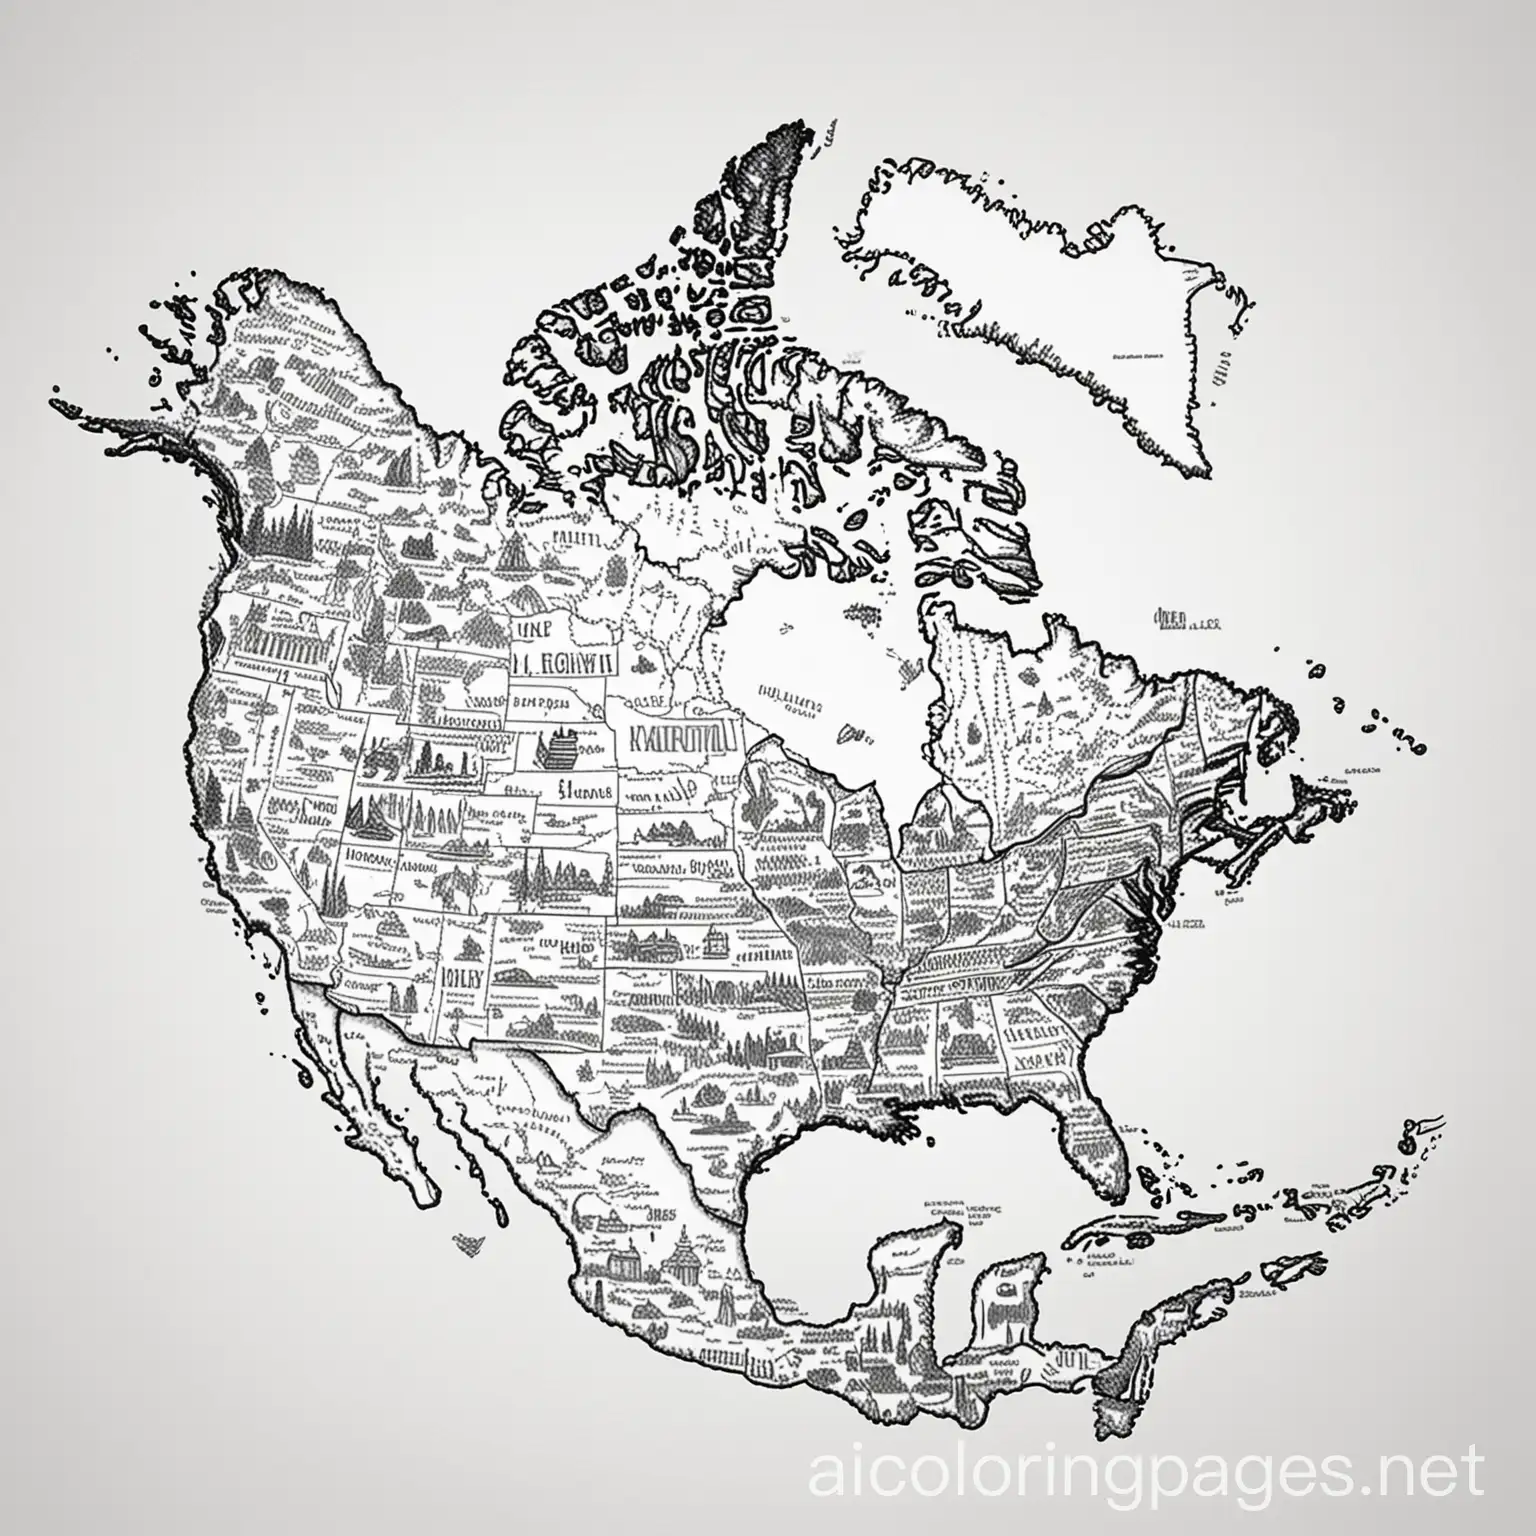 a coloring page of north america with landmarks on the map, Coloring Page, black and white, line art, white background, Simplicity, Ample White Space. The background of the coloring page is plain white to make it easy for young children to color within the lines. The outlines of all the subjects are easy to distinguish, making it simple for kids to color without too much difficulty